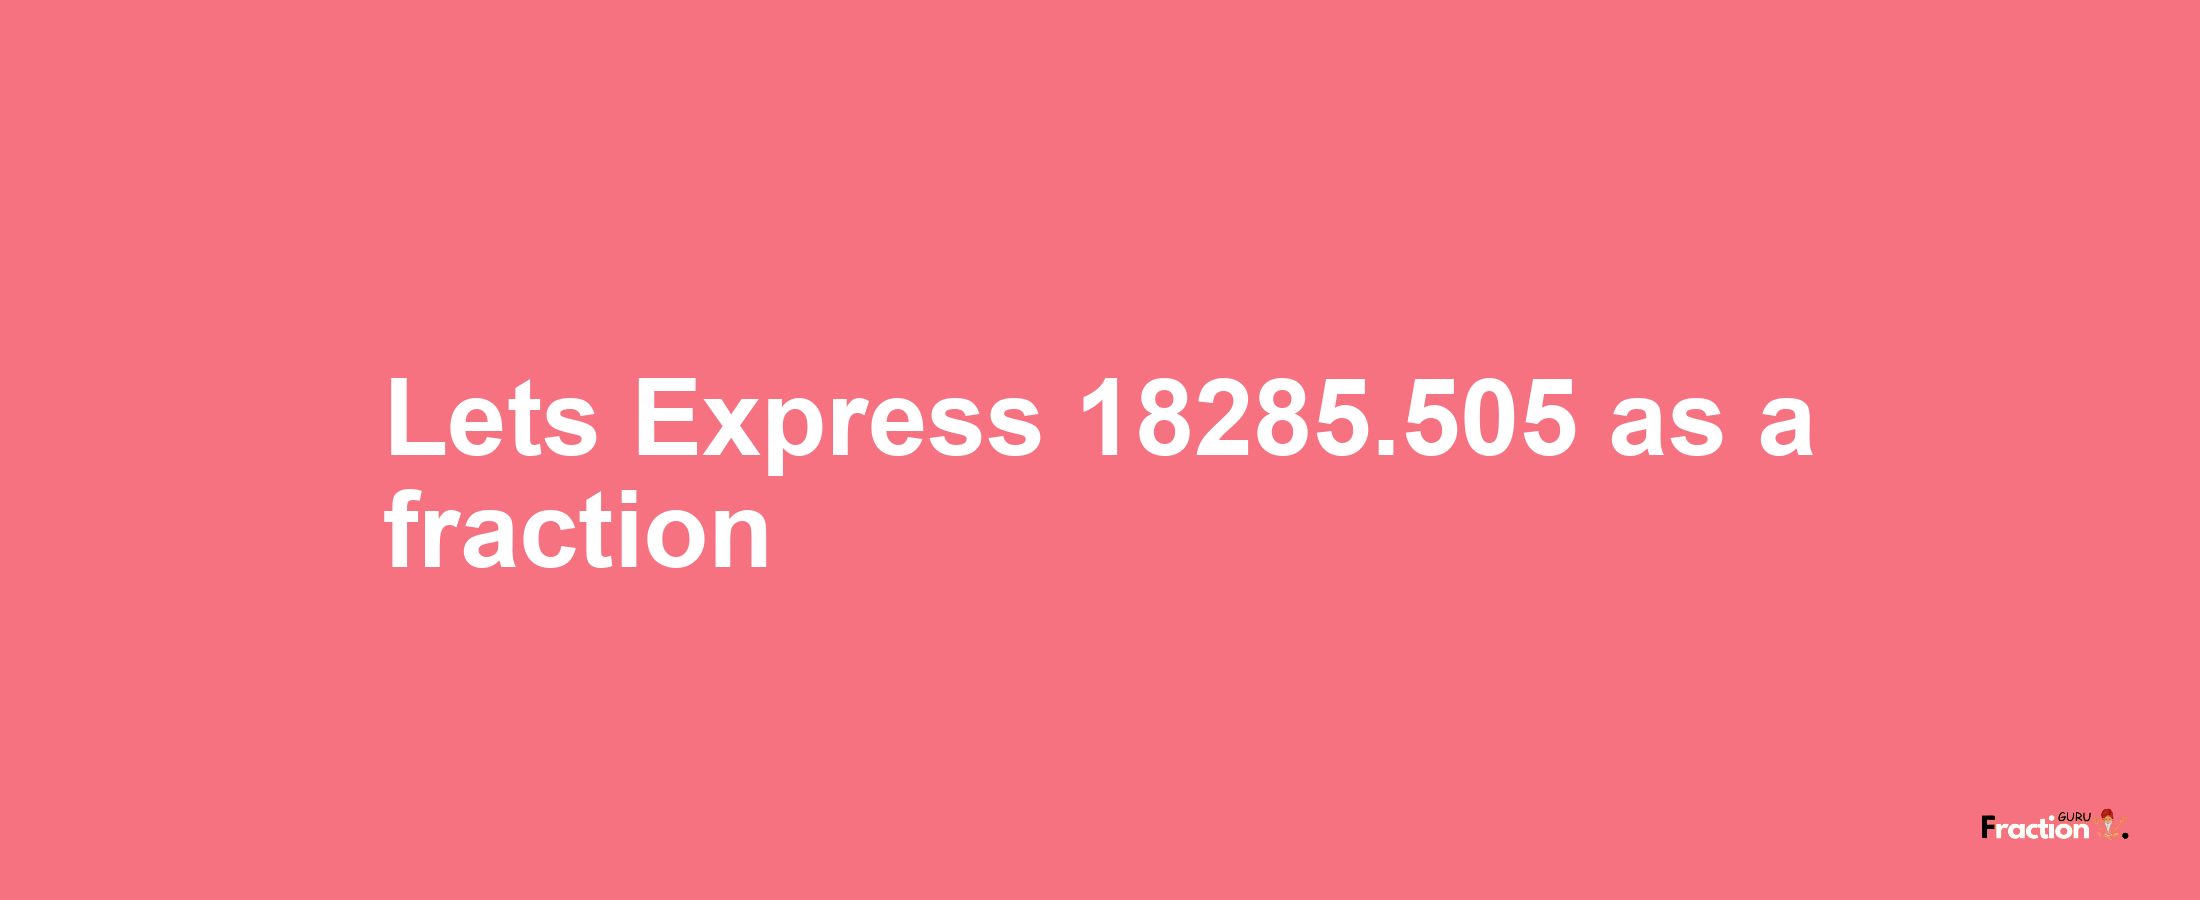 Lets Express 18285.505 as afraction